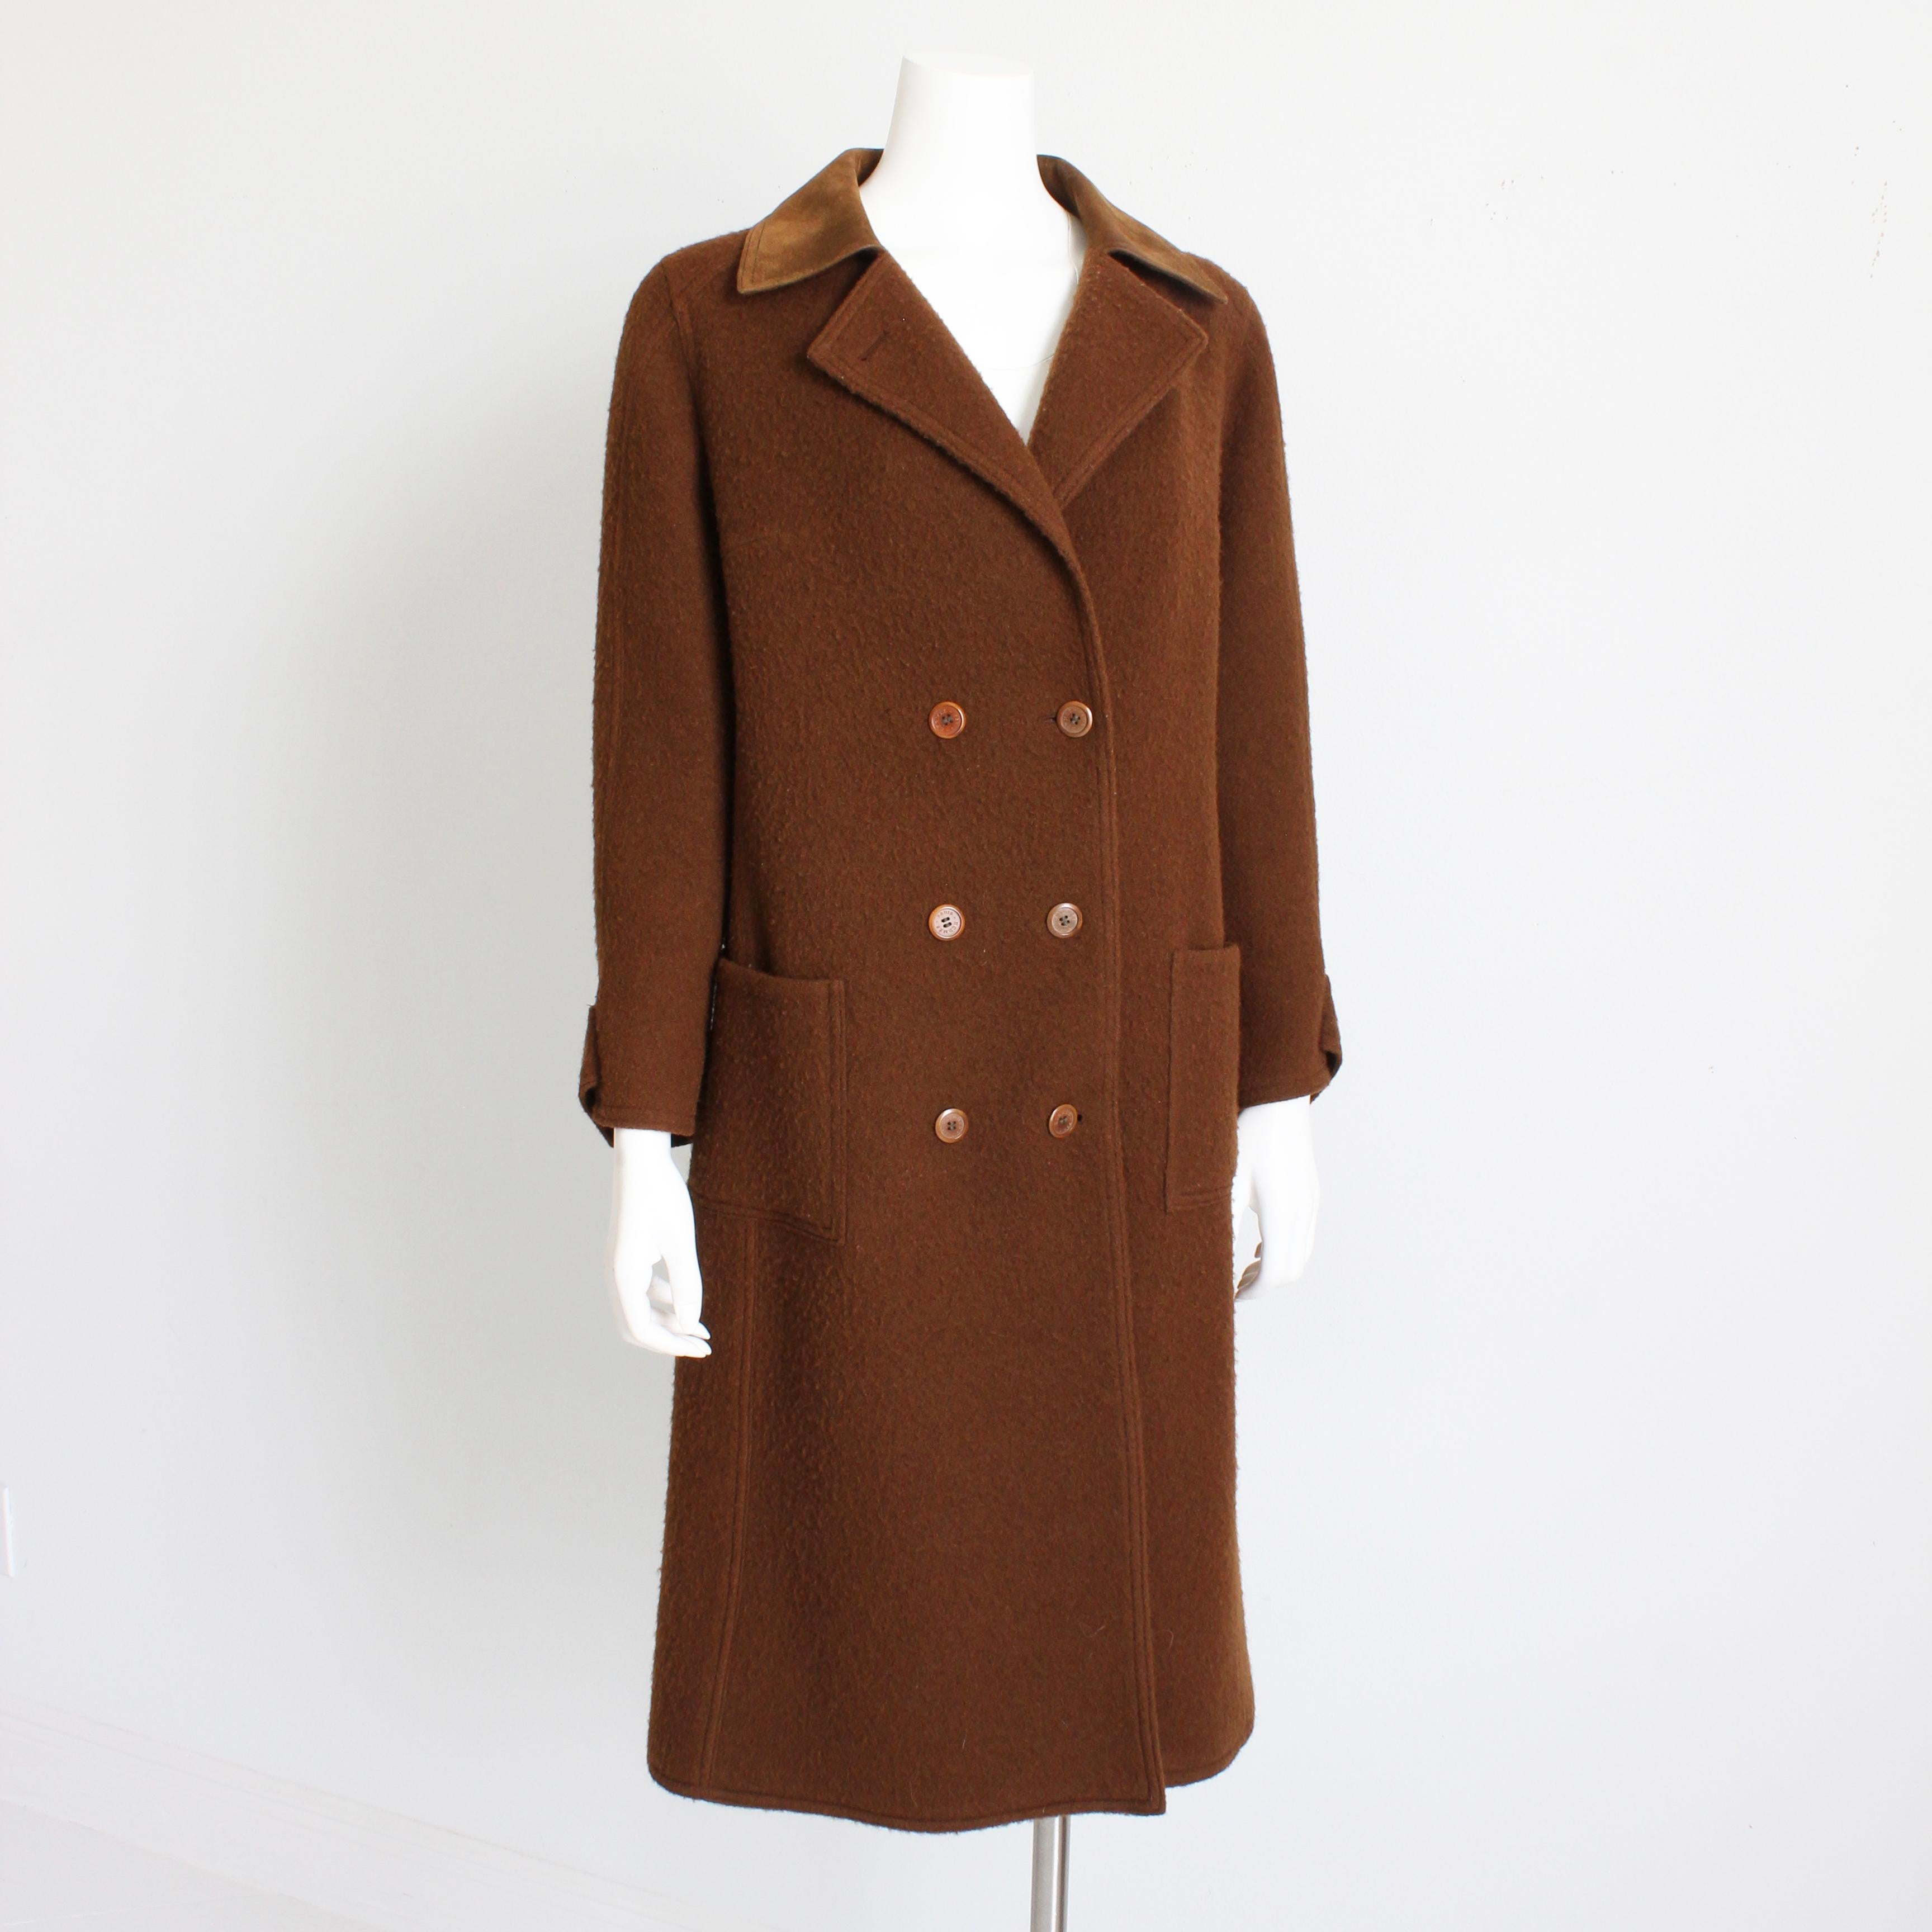 This fabulous coat was made by Hermes Paris, most likely in the late 1970s.  Made from a boiled wool blend in brown, it features a supple brown suede collar.  Timeless styling and construction on this piece - perfect for the fall and winter